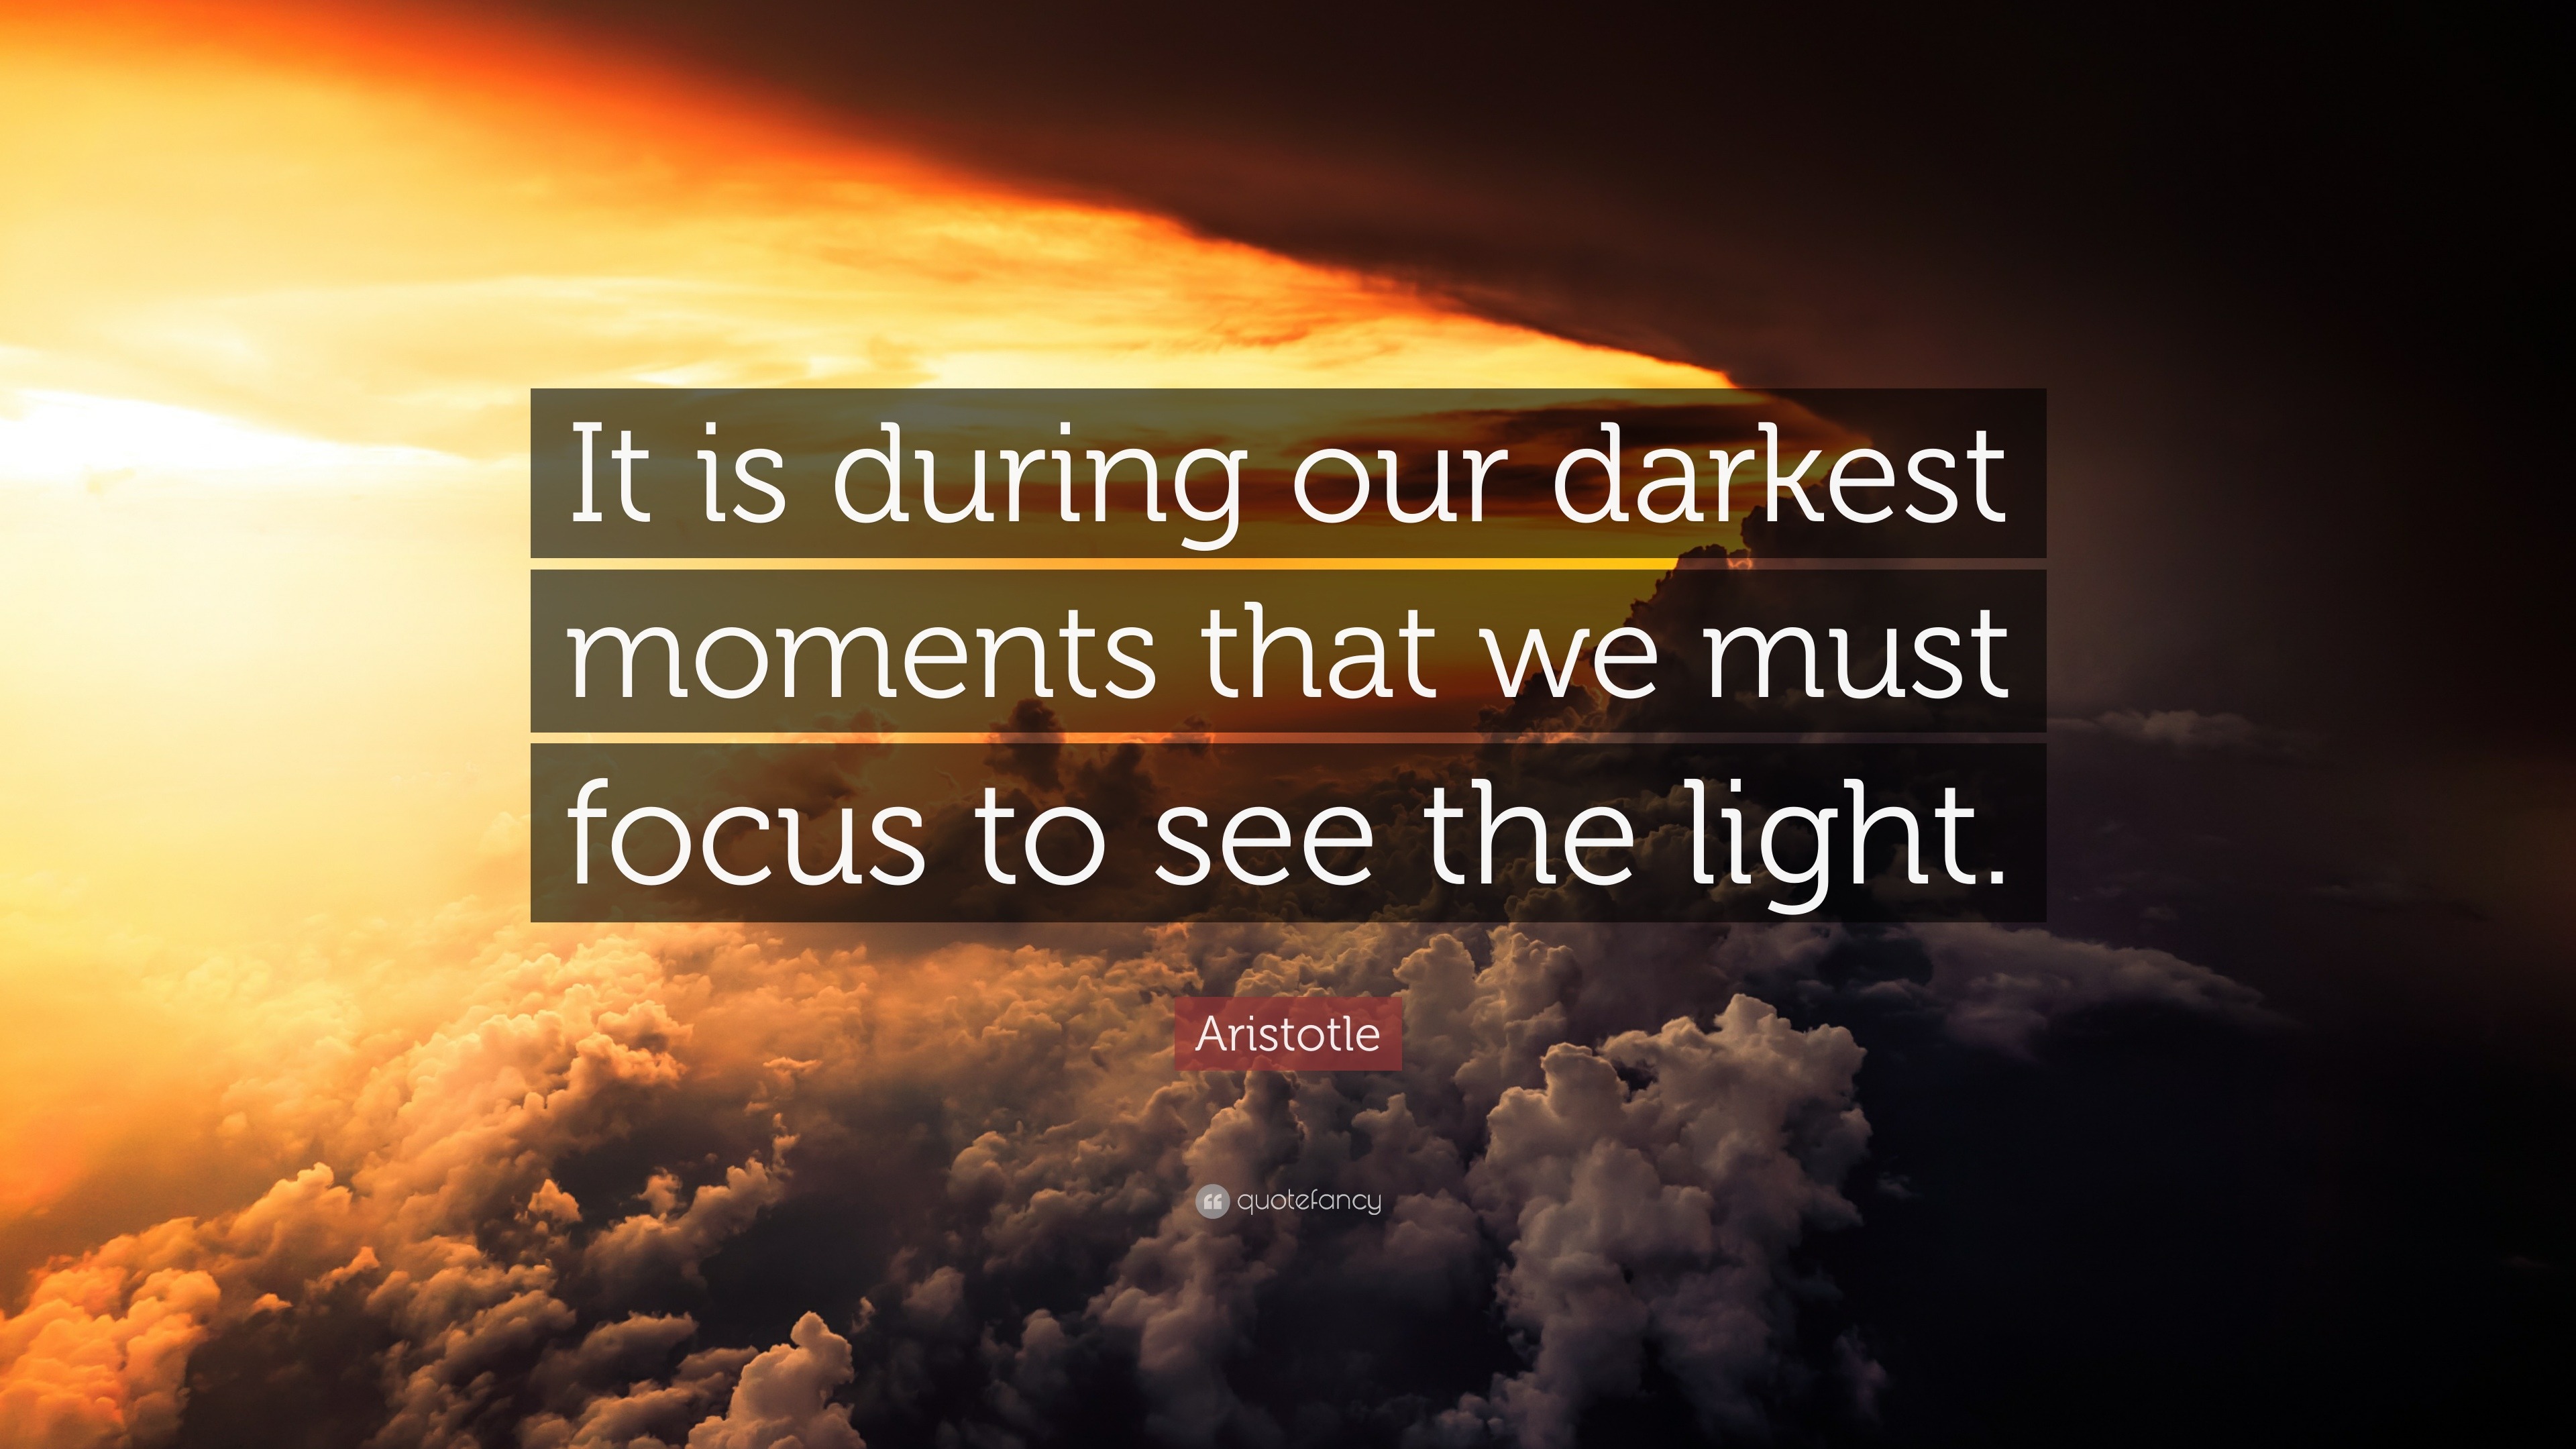 Aristotle Quote: “It is during our darkest moments that we must focus